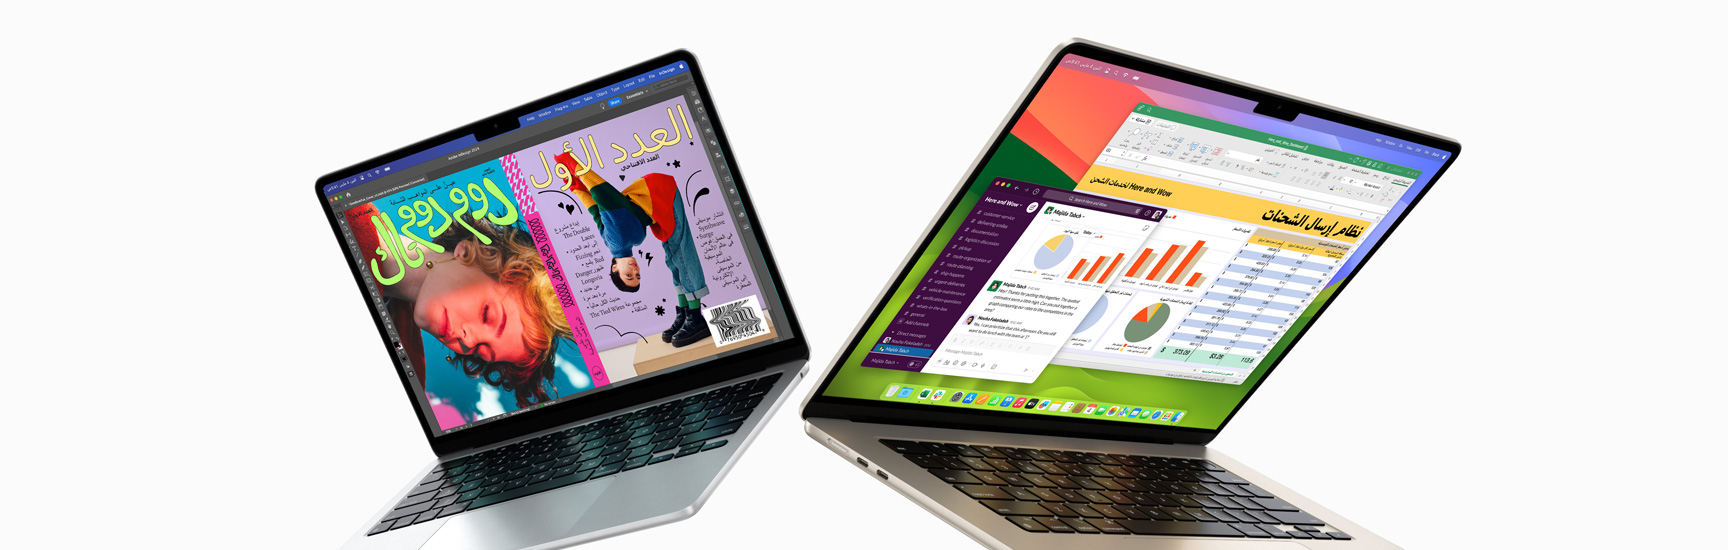 Partially open 13-inch MacBook Air on left and 15-inch MacBook Air on right. 13-inch screen shows colorful ‘zine cover created with In Design. 15-inch screen shows Microsoft Excel and Slack.